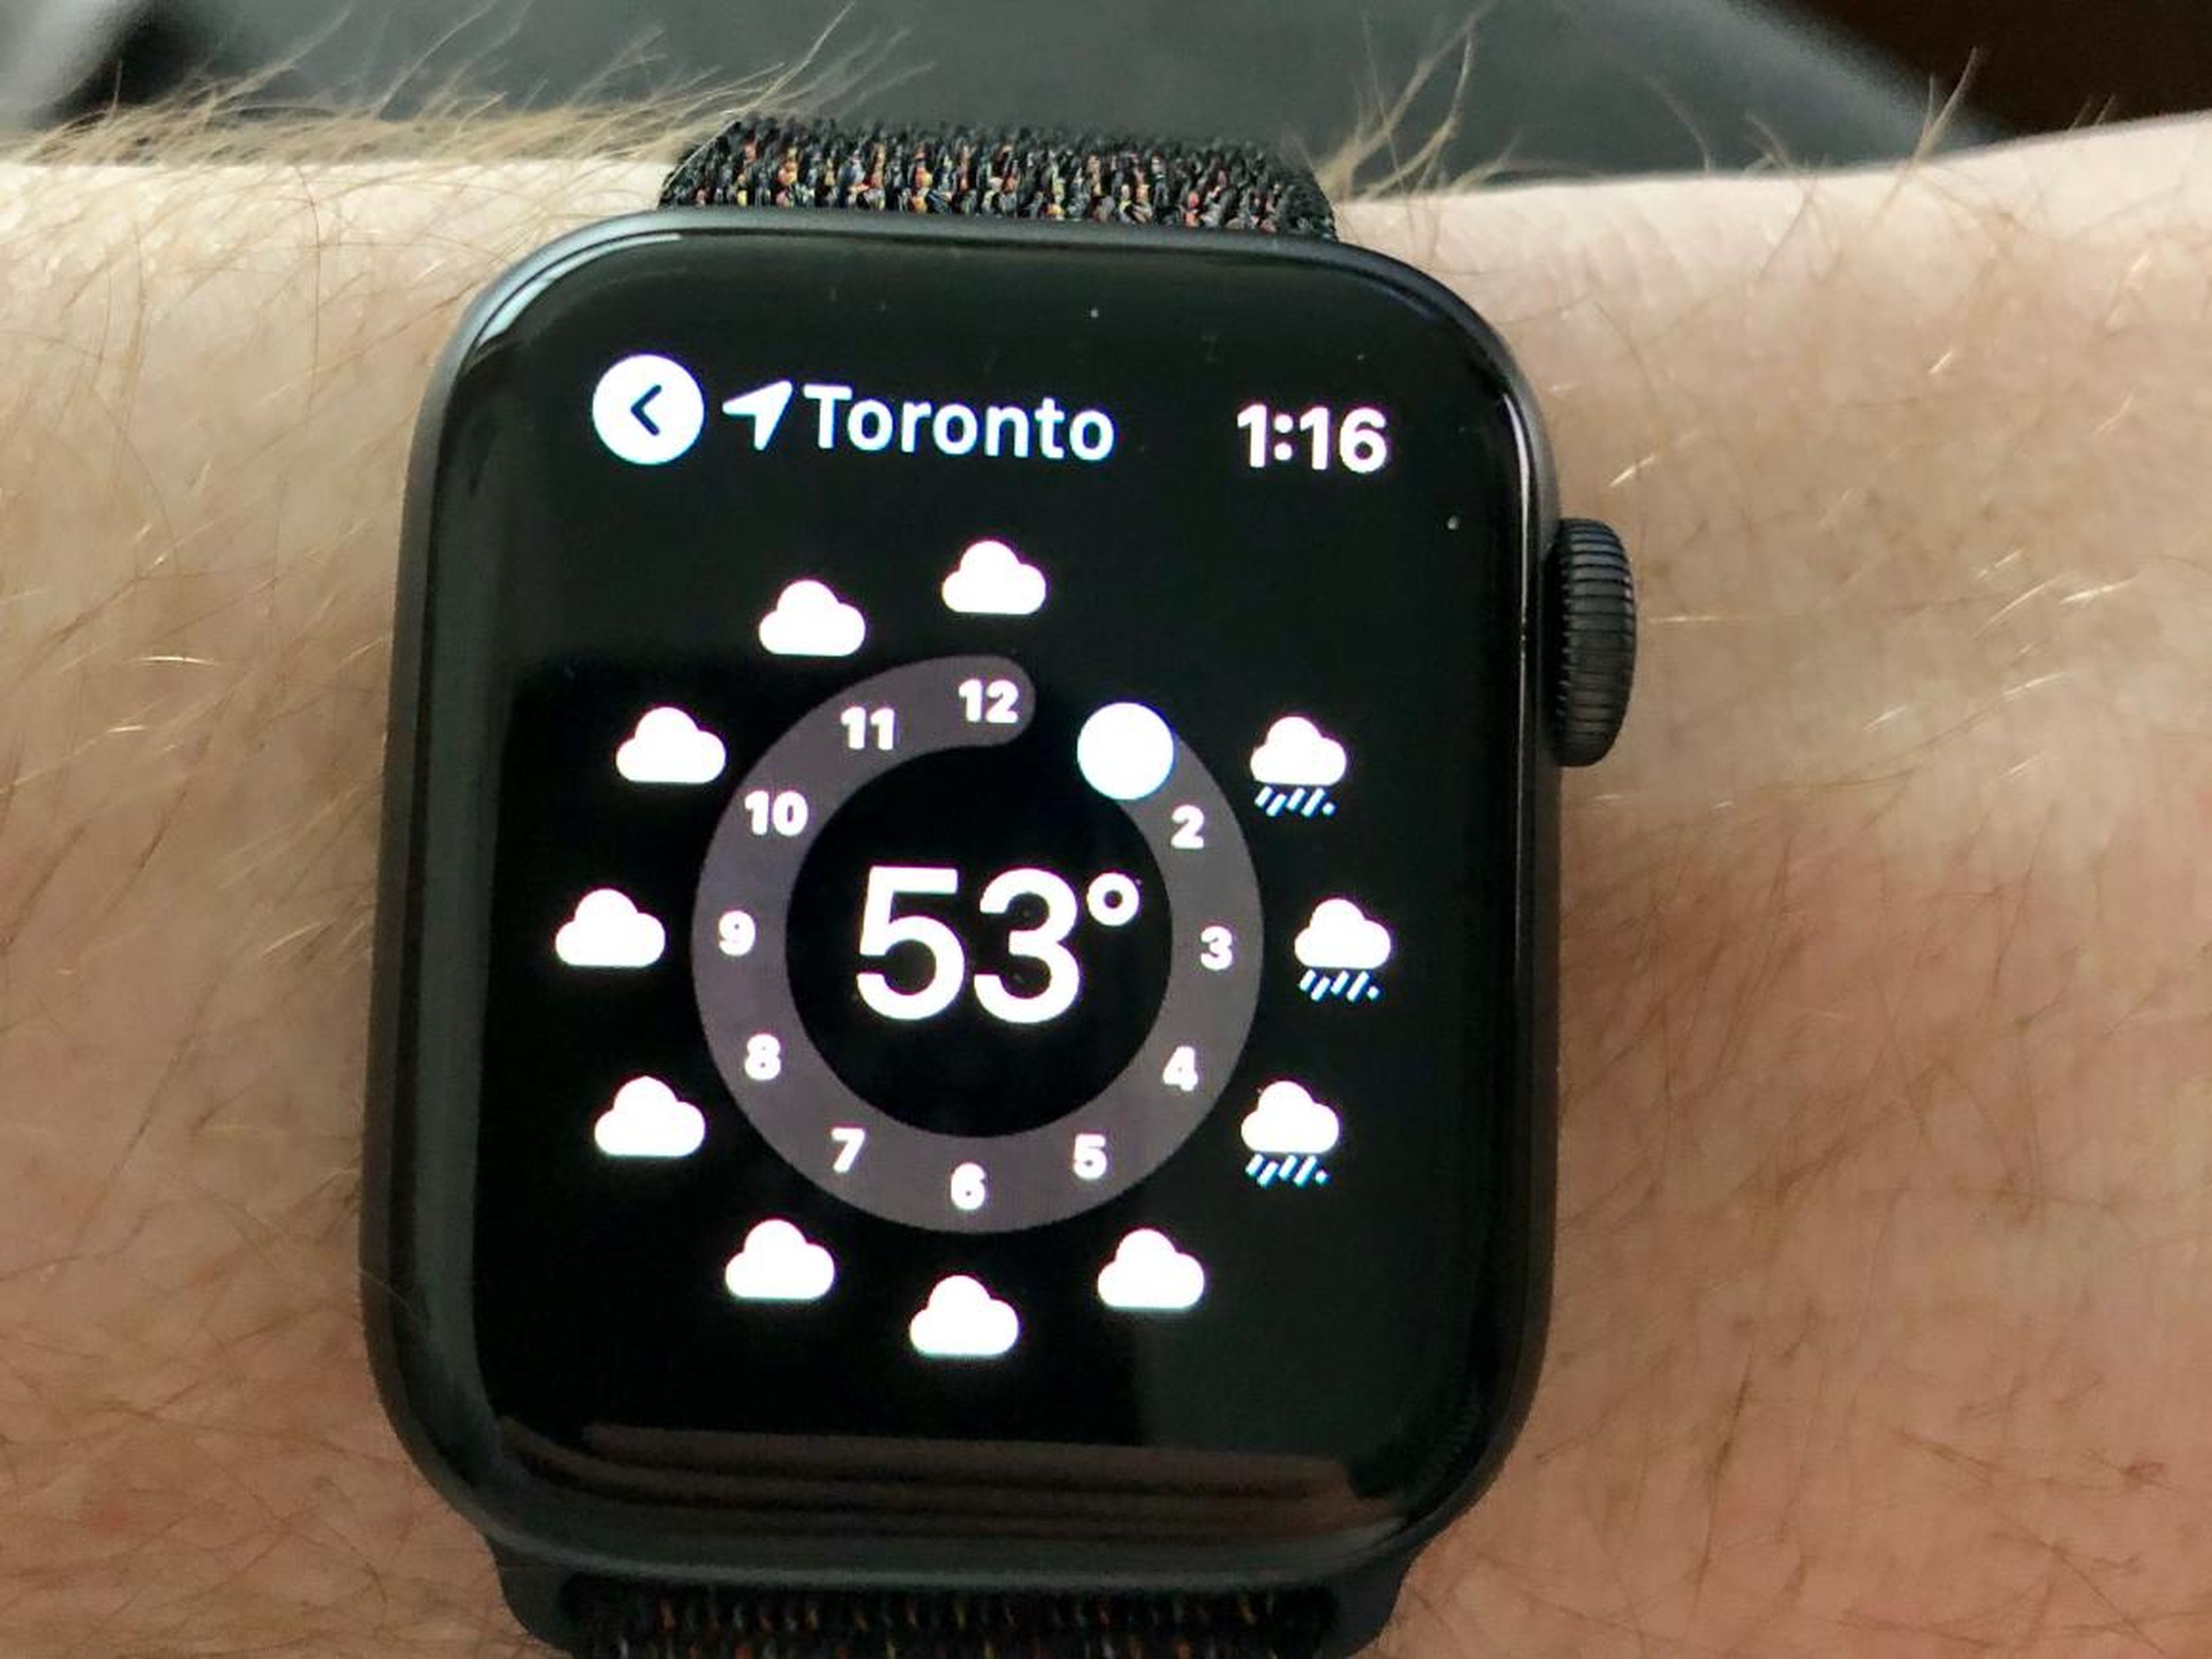 7. Checking the weather is fast and easy with an Apple Watch.